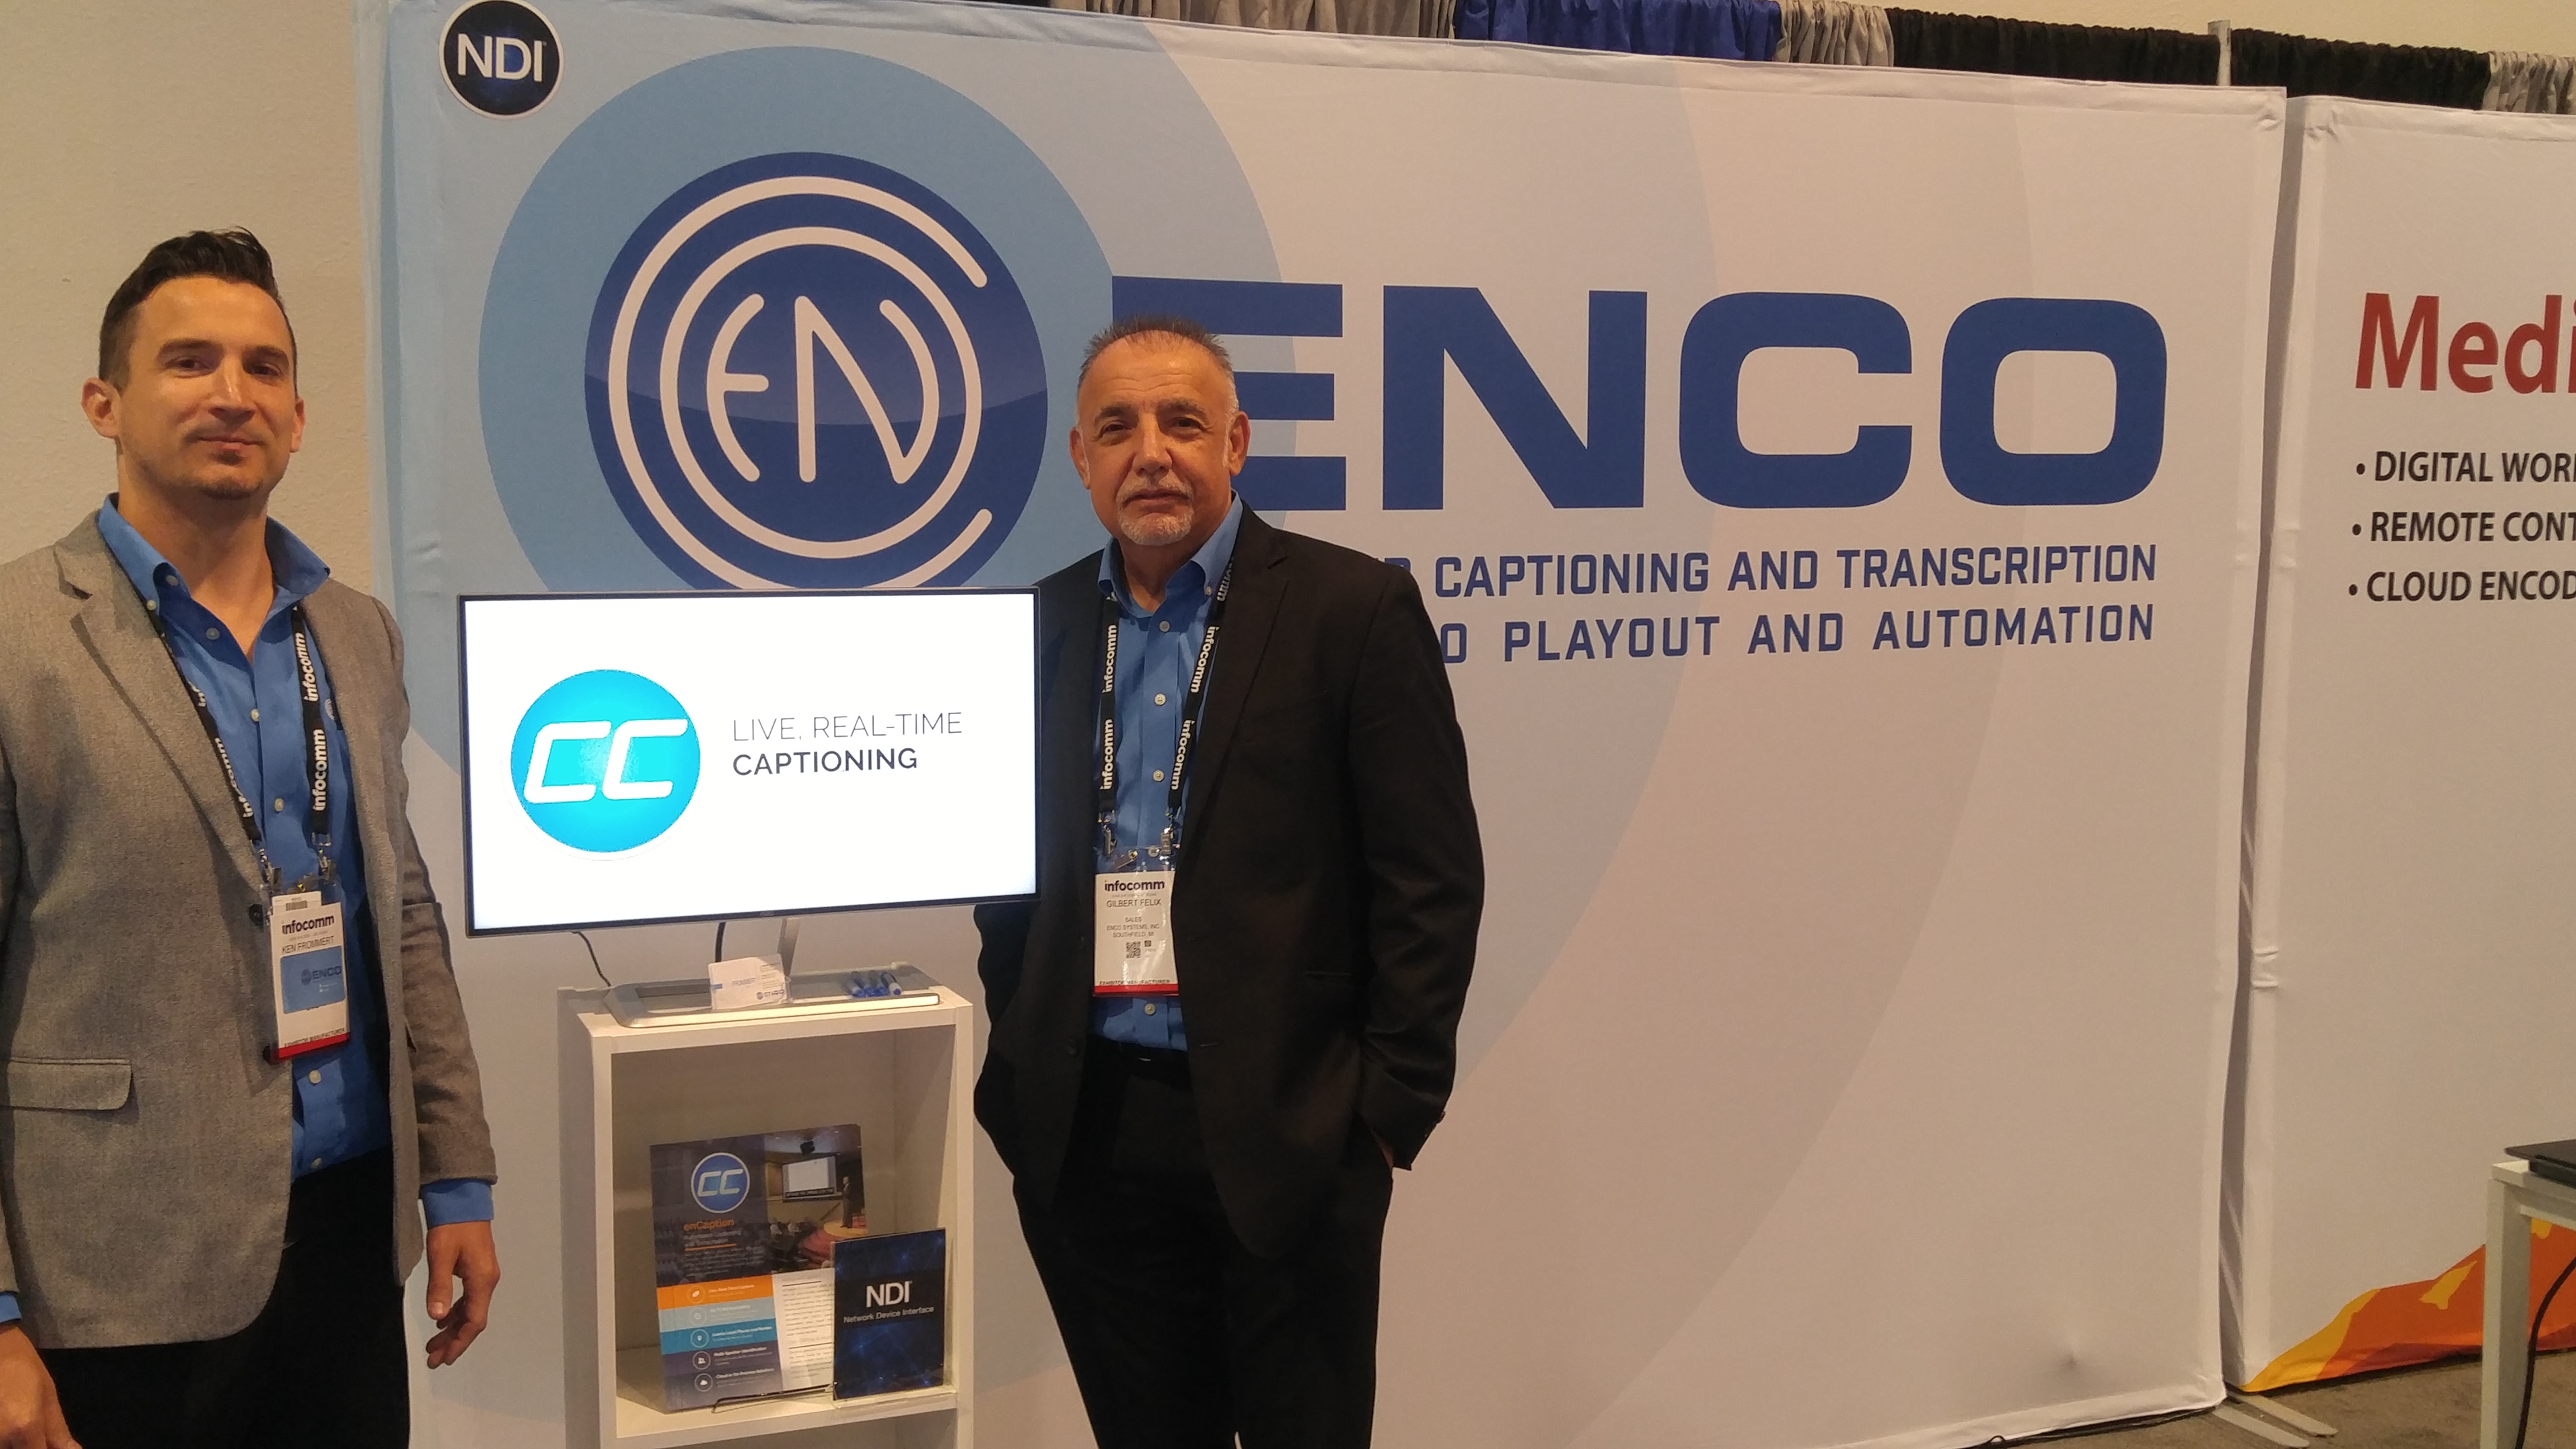 Enco booth at InfoComm 2018